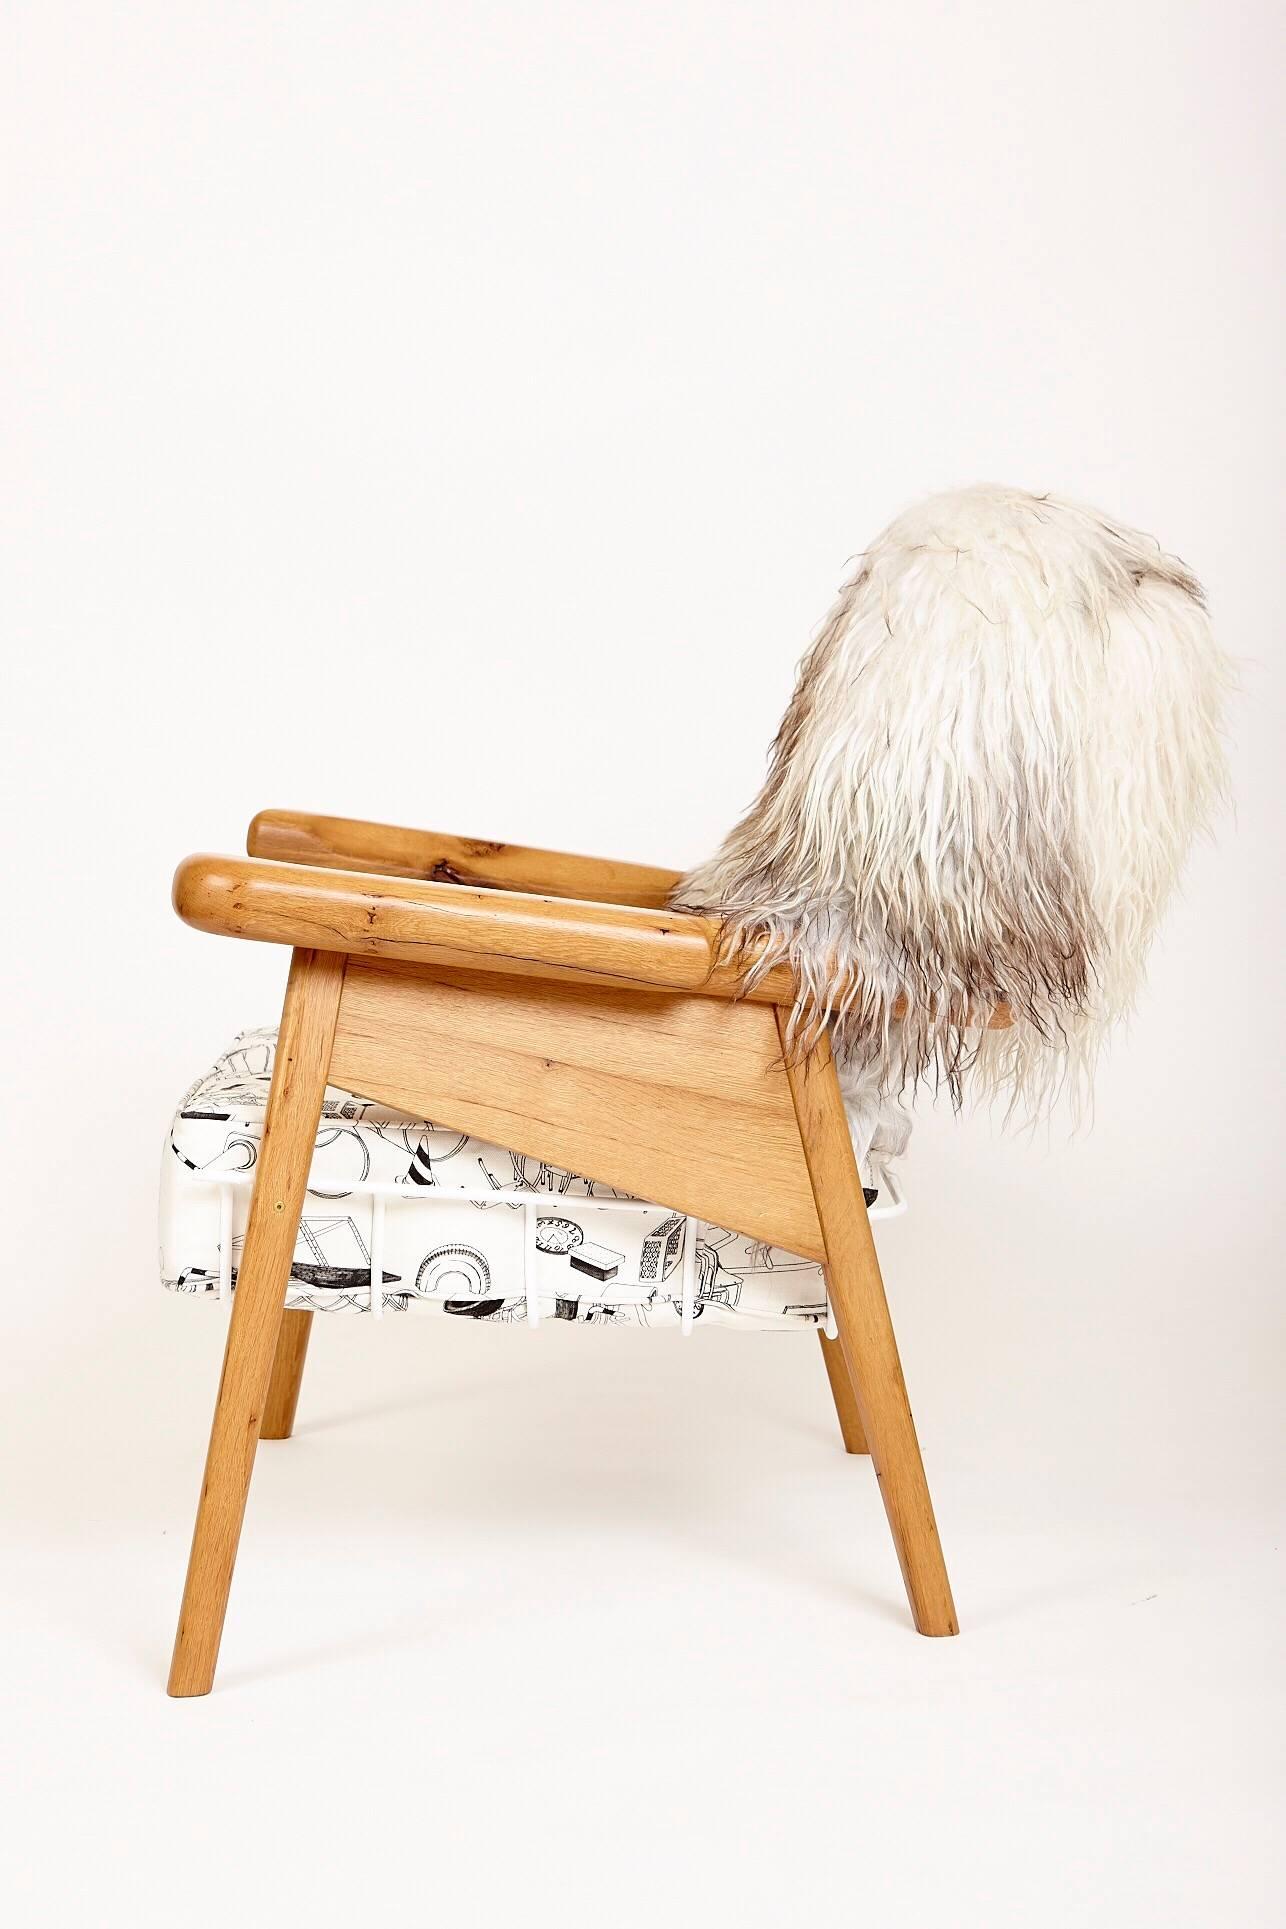 The Fuzzy Captain is a variation on Evan's faithful captains chair design. It combines bigger and beefier proportions with his dynamic design to make for an intensely relaxing sit. Evan’s original concept for this piece was to make a chair that